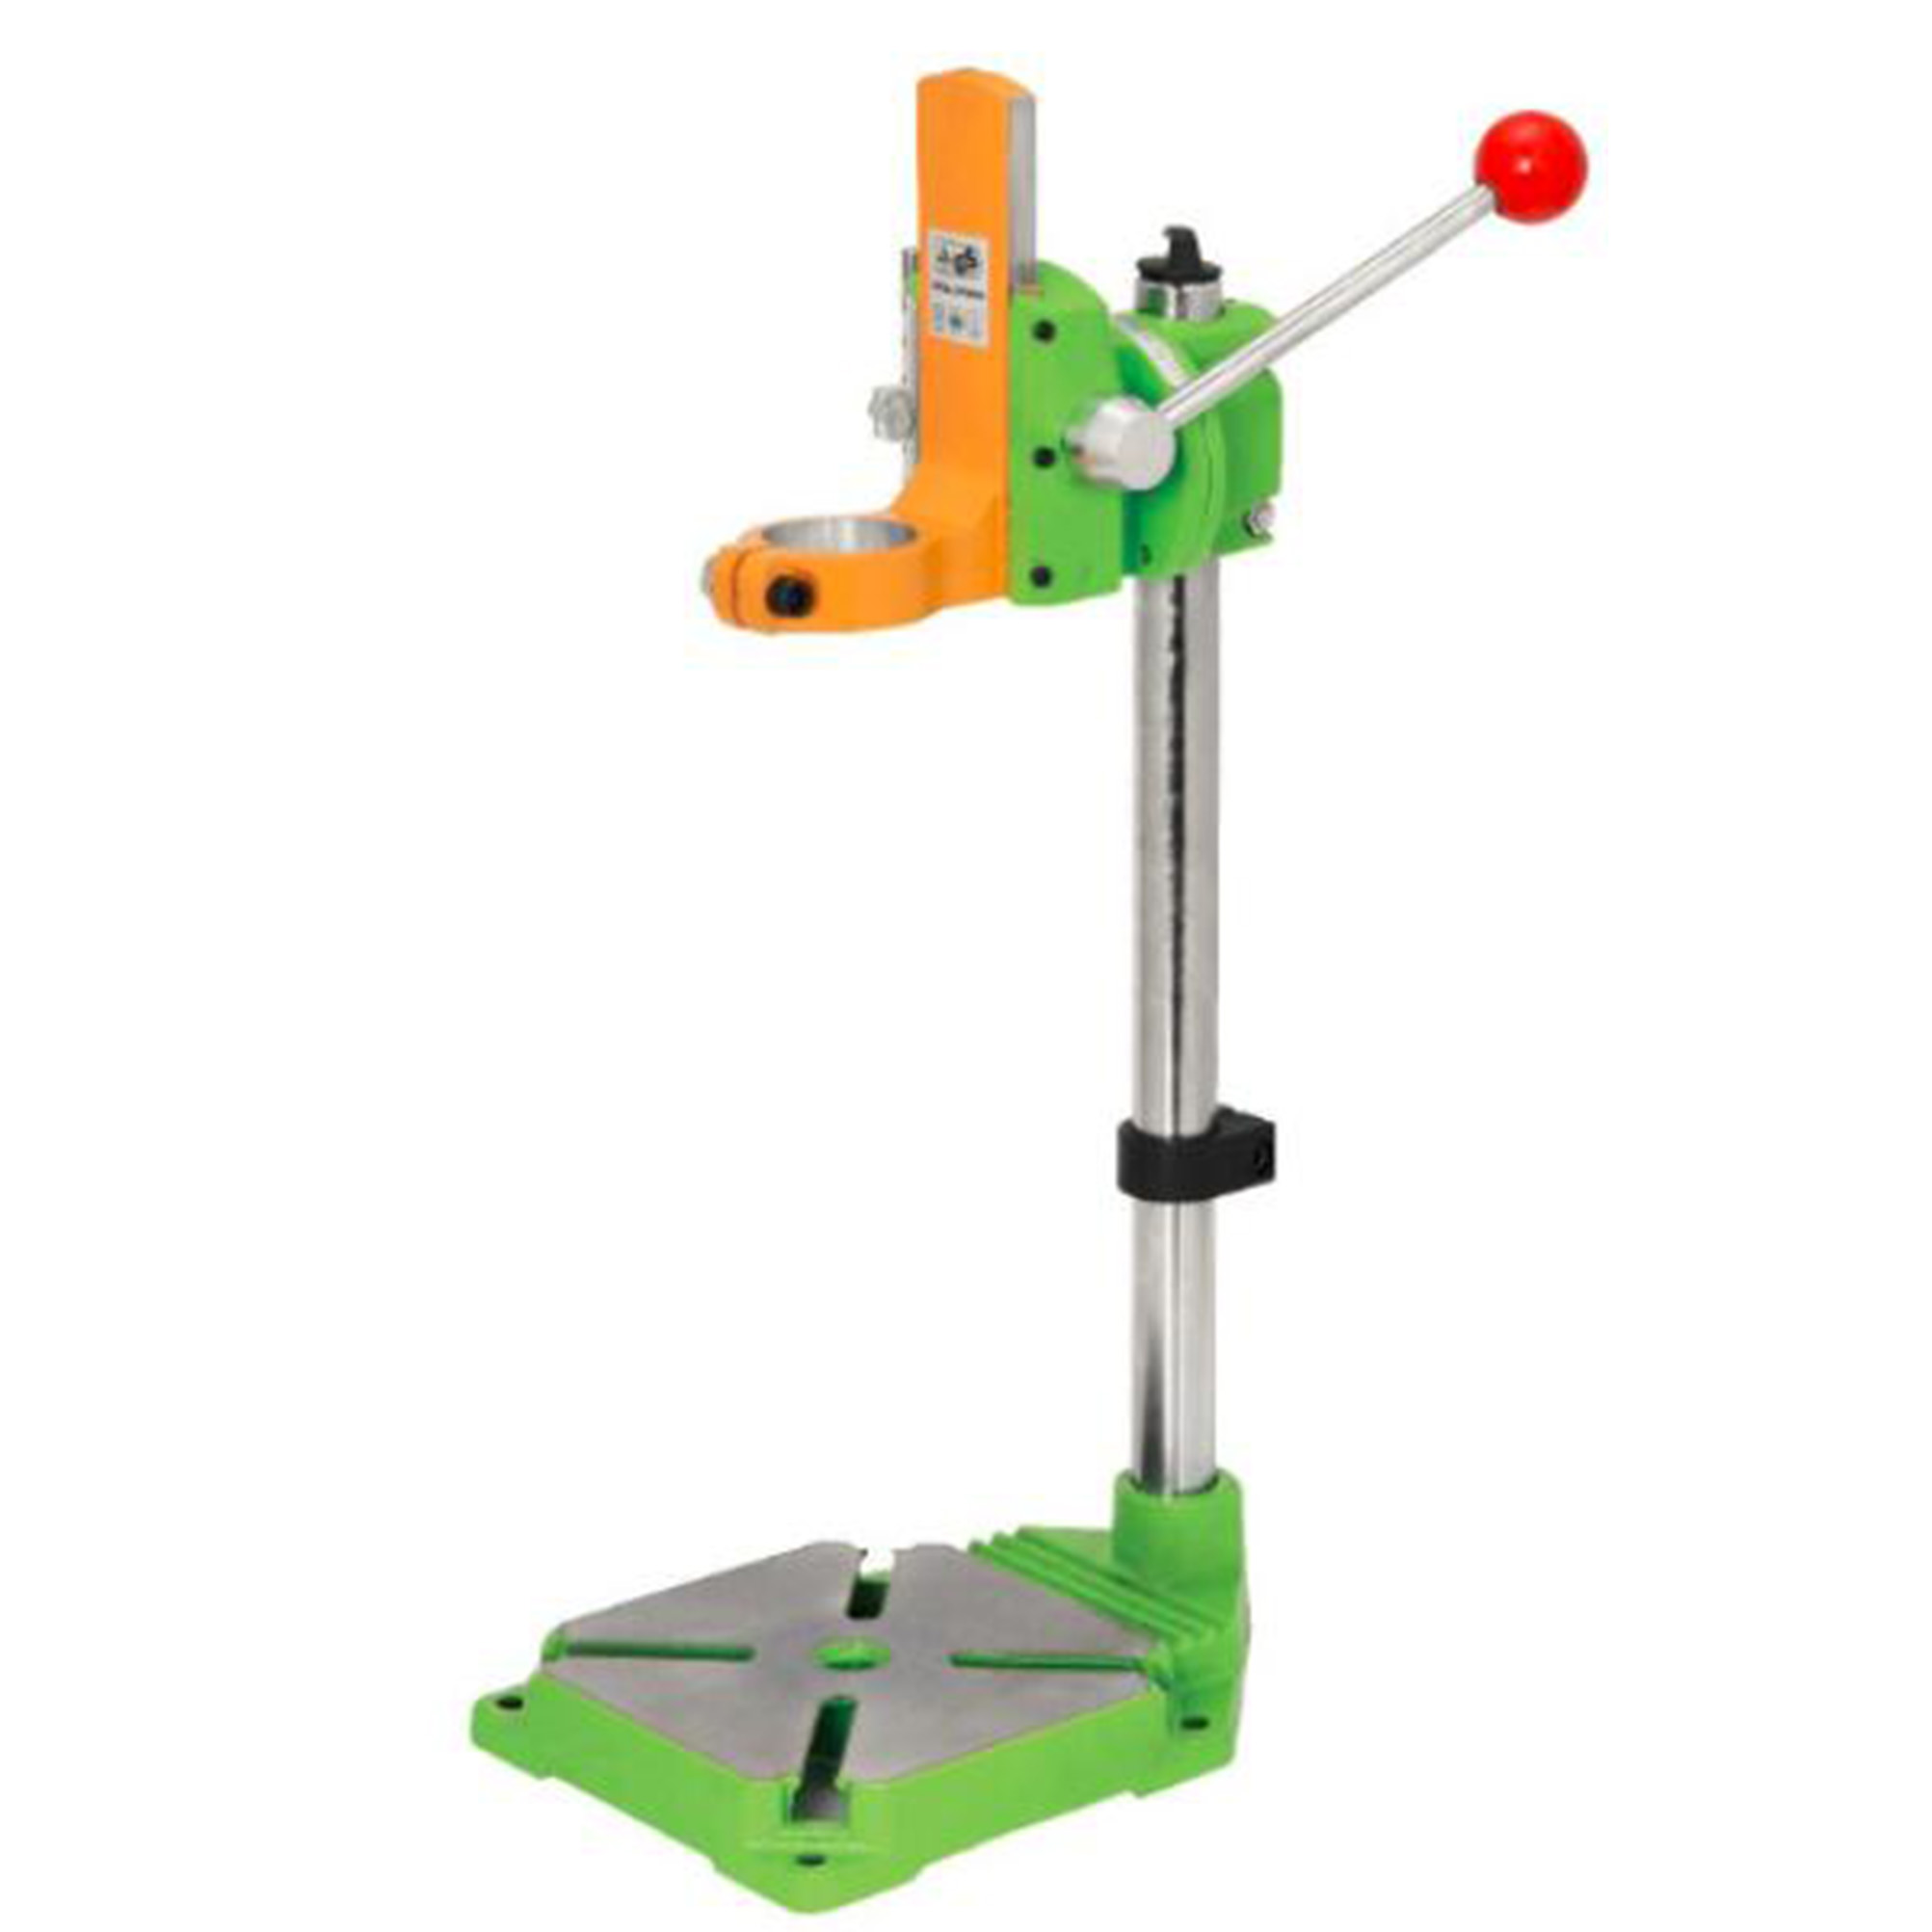 BG6117 Bench Drill Stand/Press Mini Electric Drill Carrier Bracket 90 Degree Rotating Fixed Frame Workbench Clamp